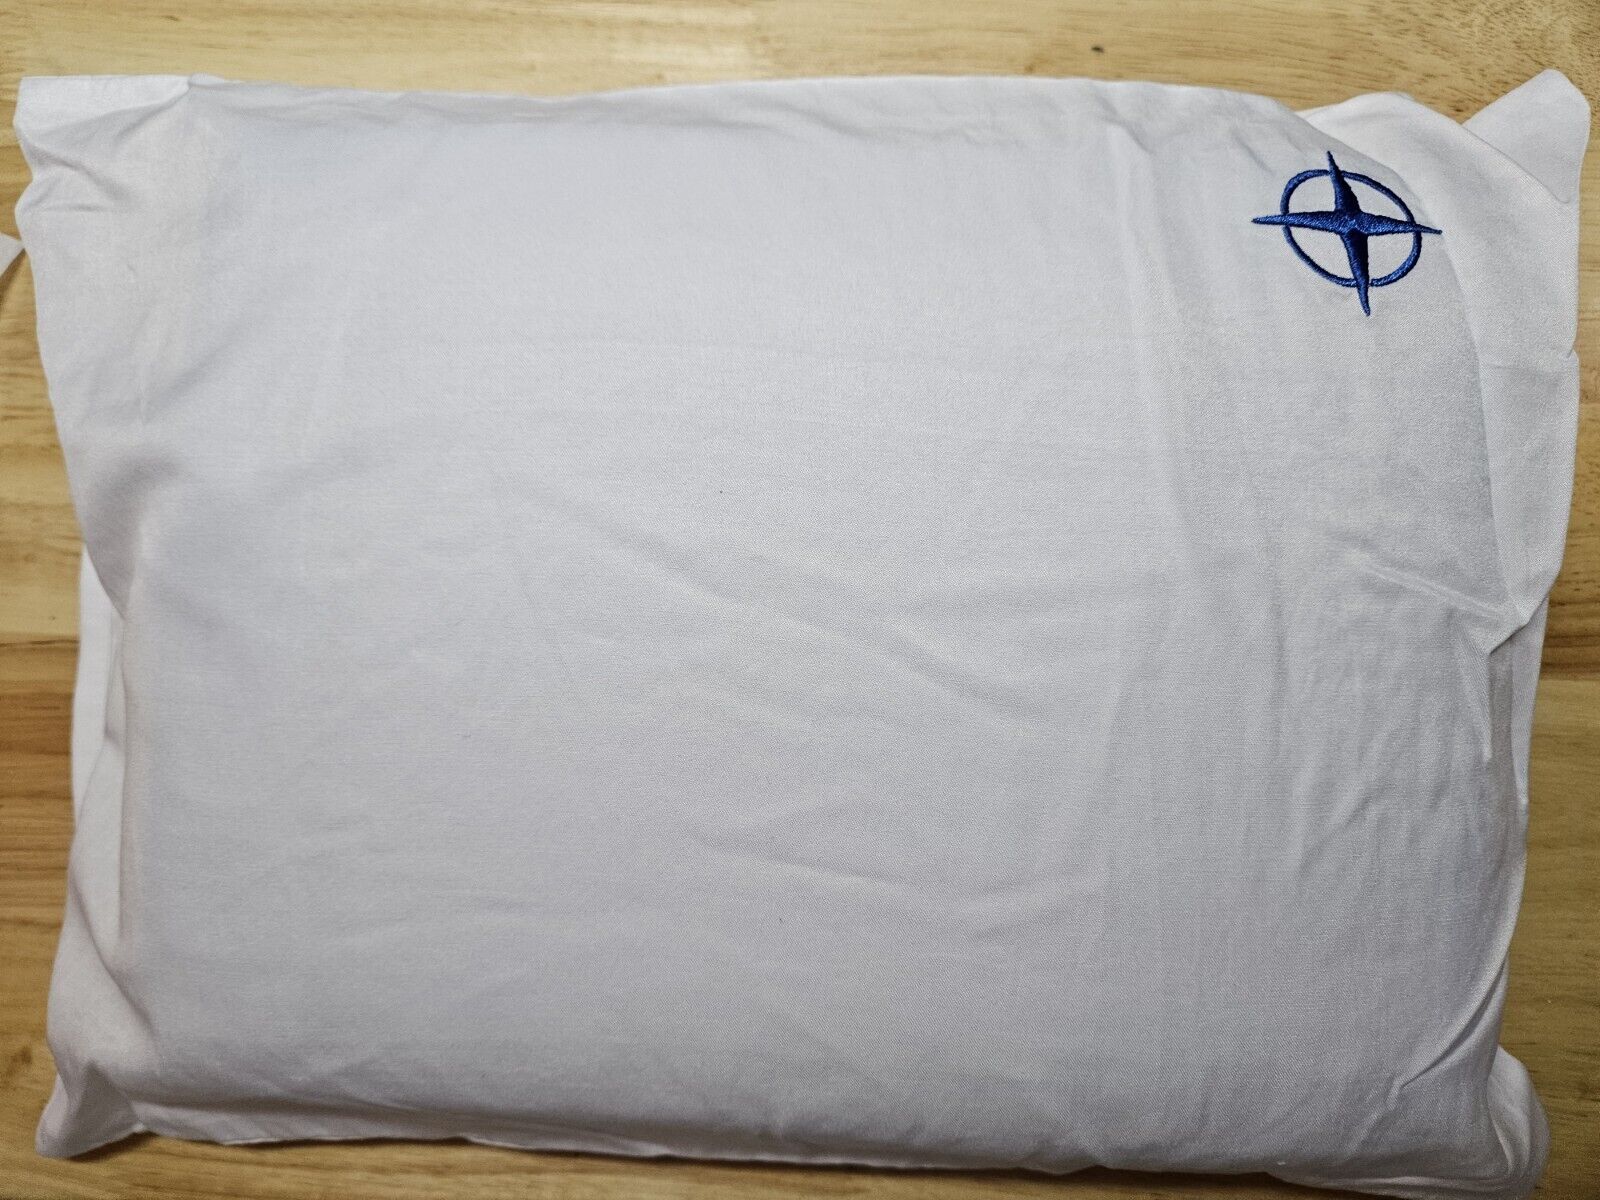 UNITED AIRLINES POLARIS BUSINESS CLASS MEMORY FOAM COOL GEL PILLOW WHITE CASE